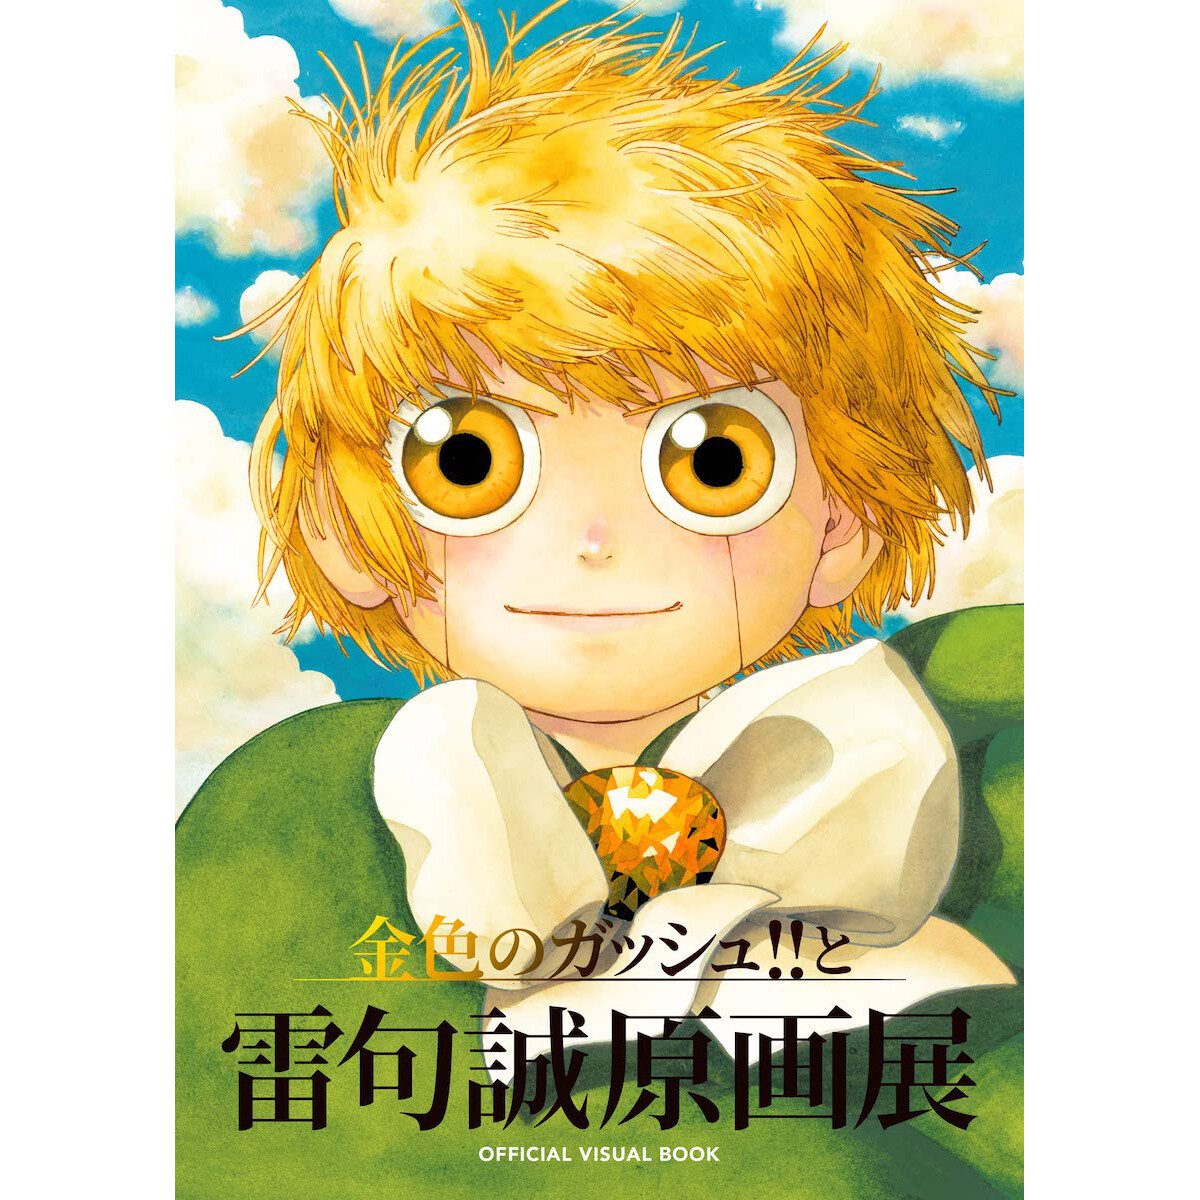 Zatch Bell! Manga Gets Its Own Art Exhibition This Fall